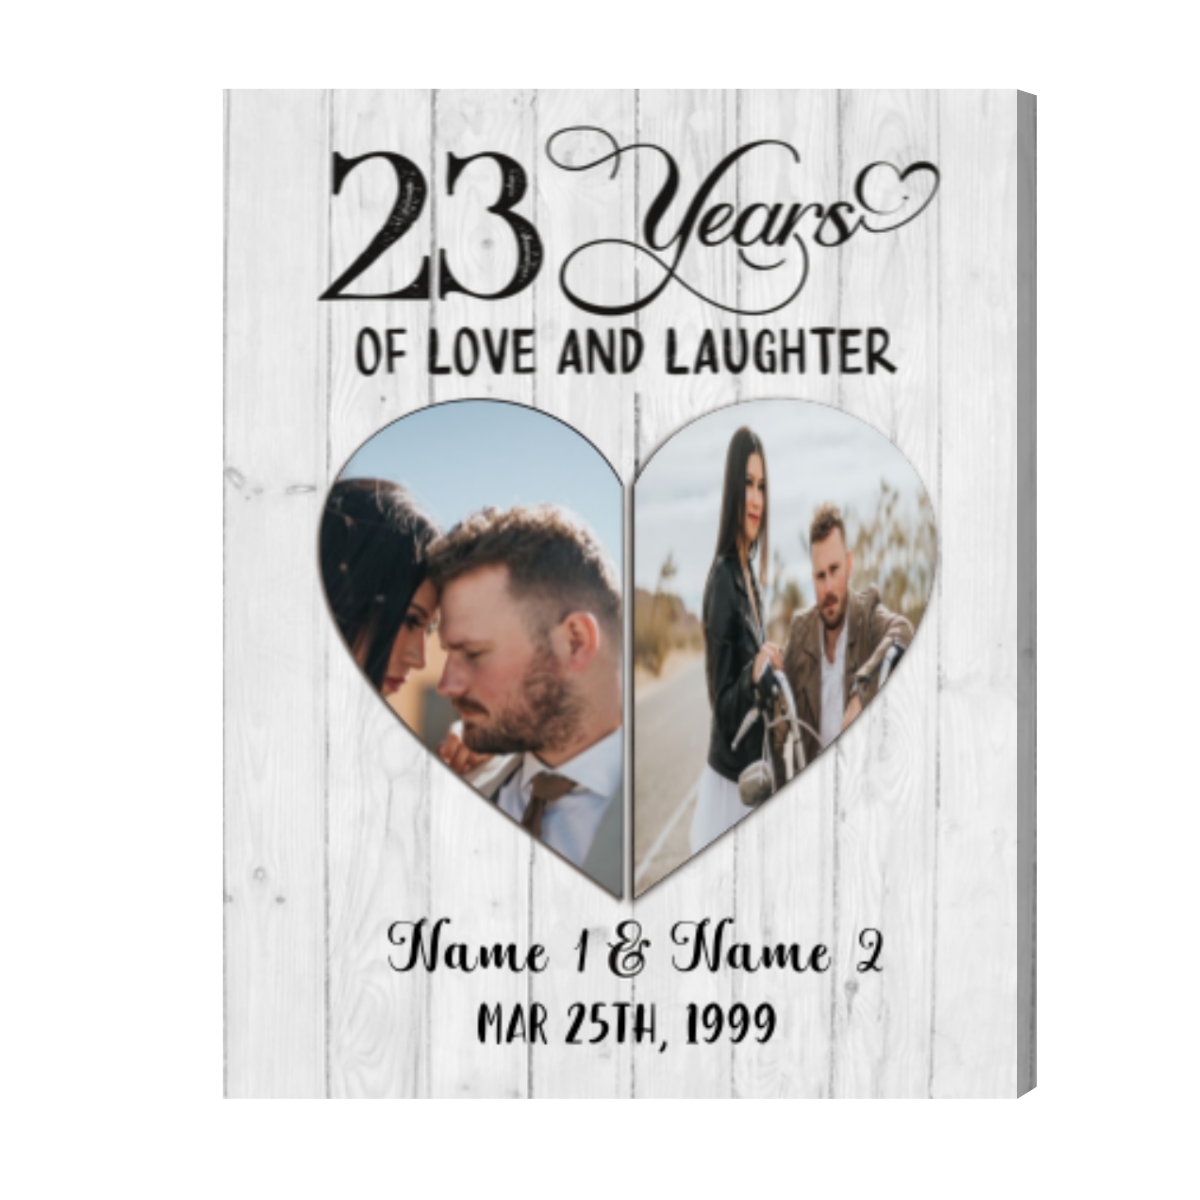 23 First Year Wedding Anniversary Gifts for Husband